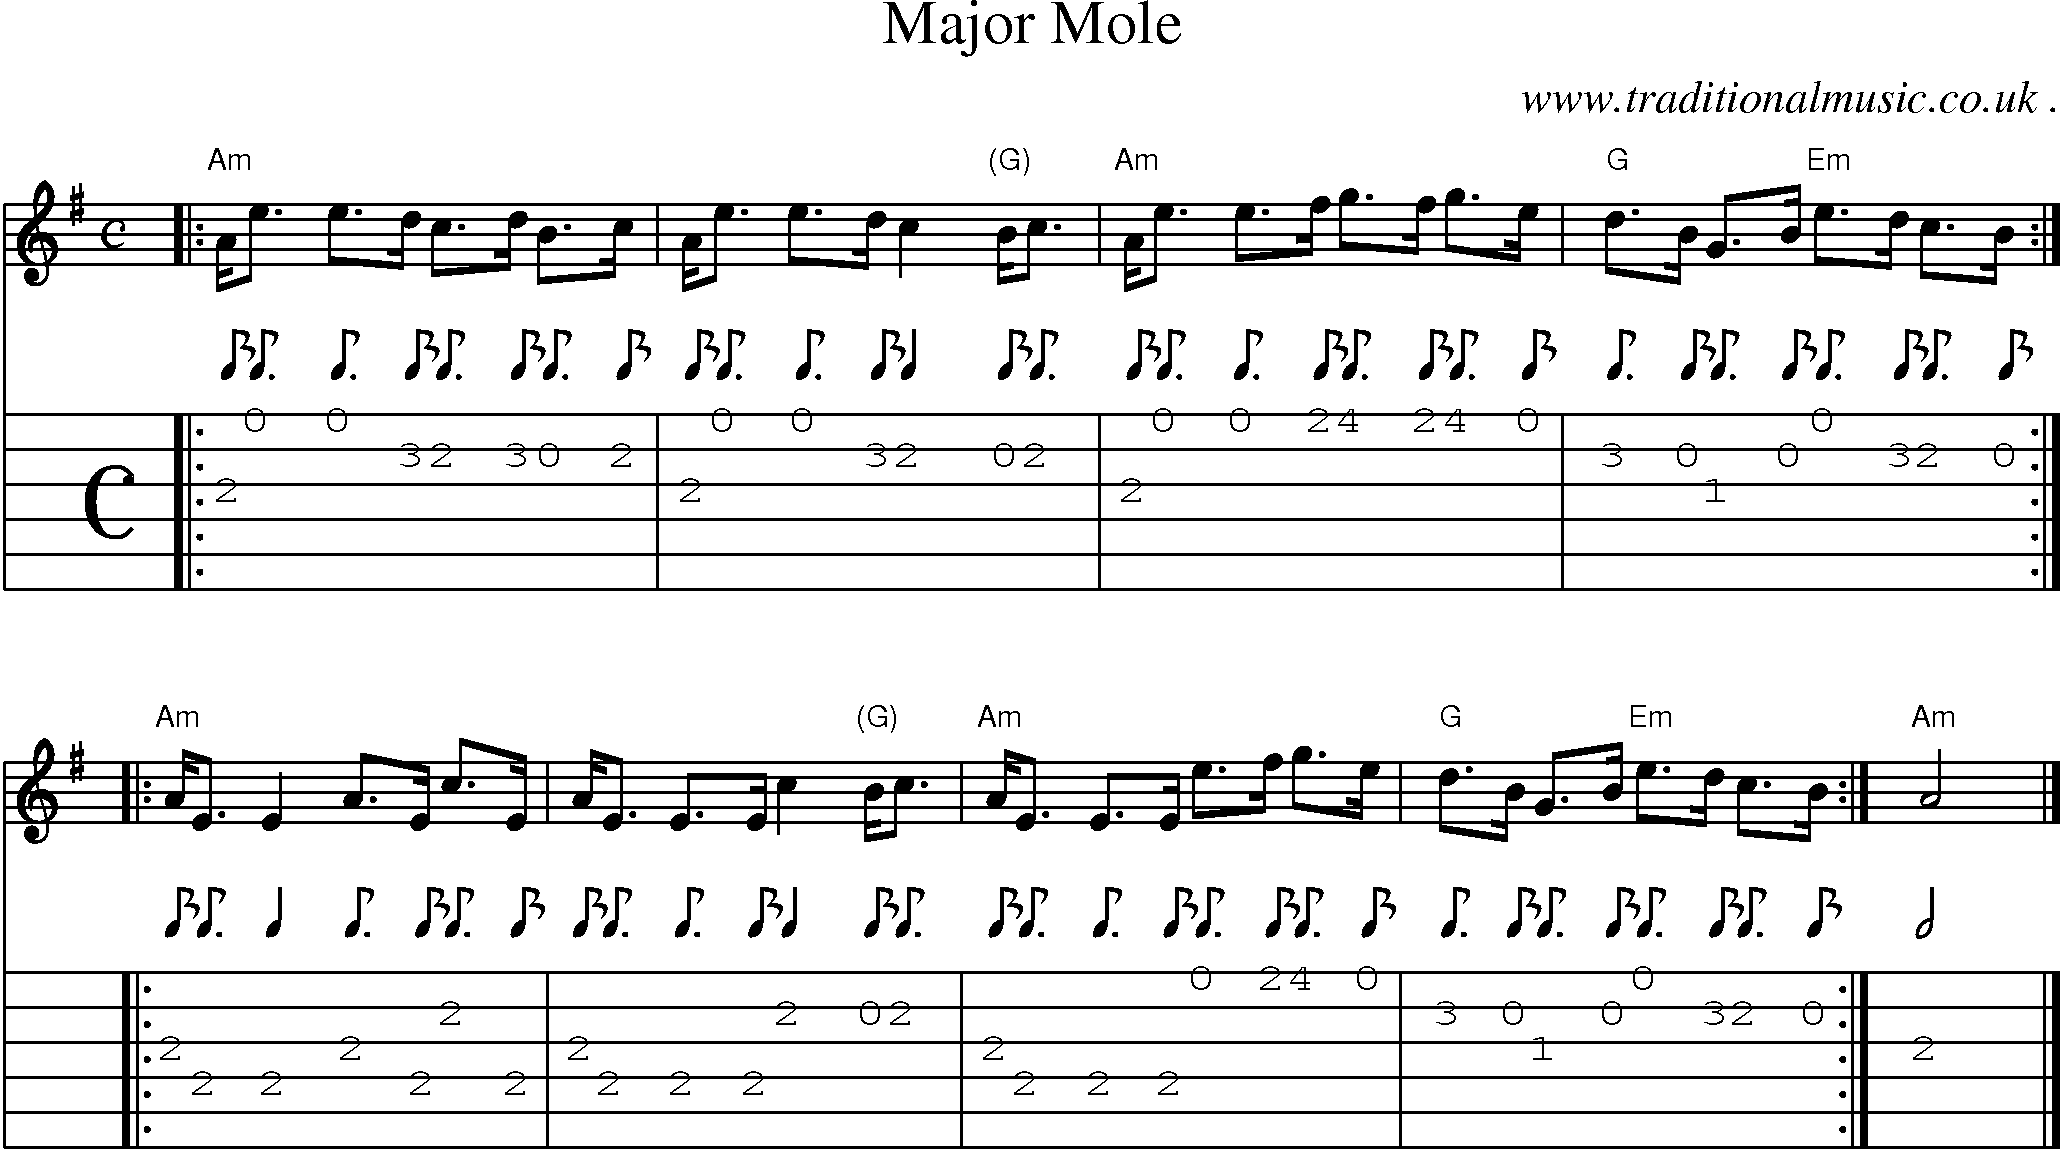 Sheet-music  score, Chords and Guitar Tabs for Major Mole